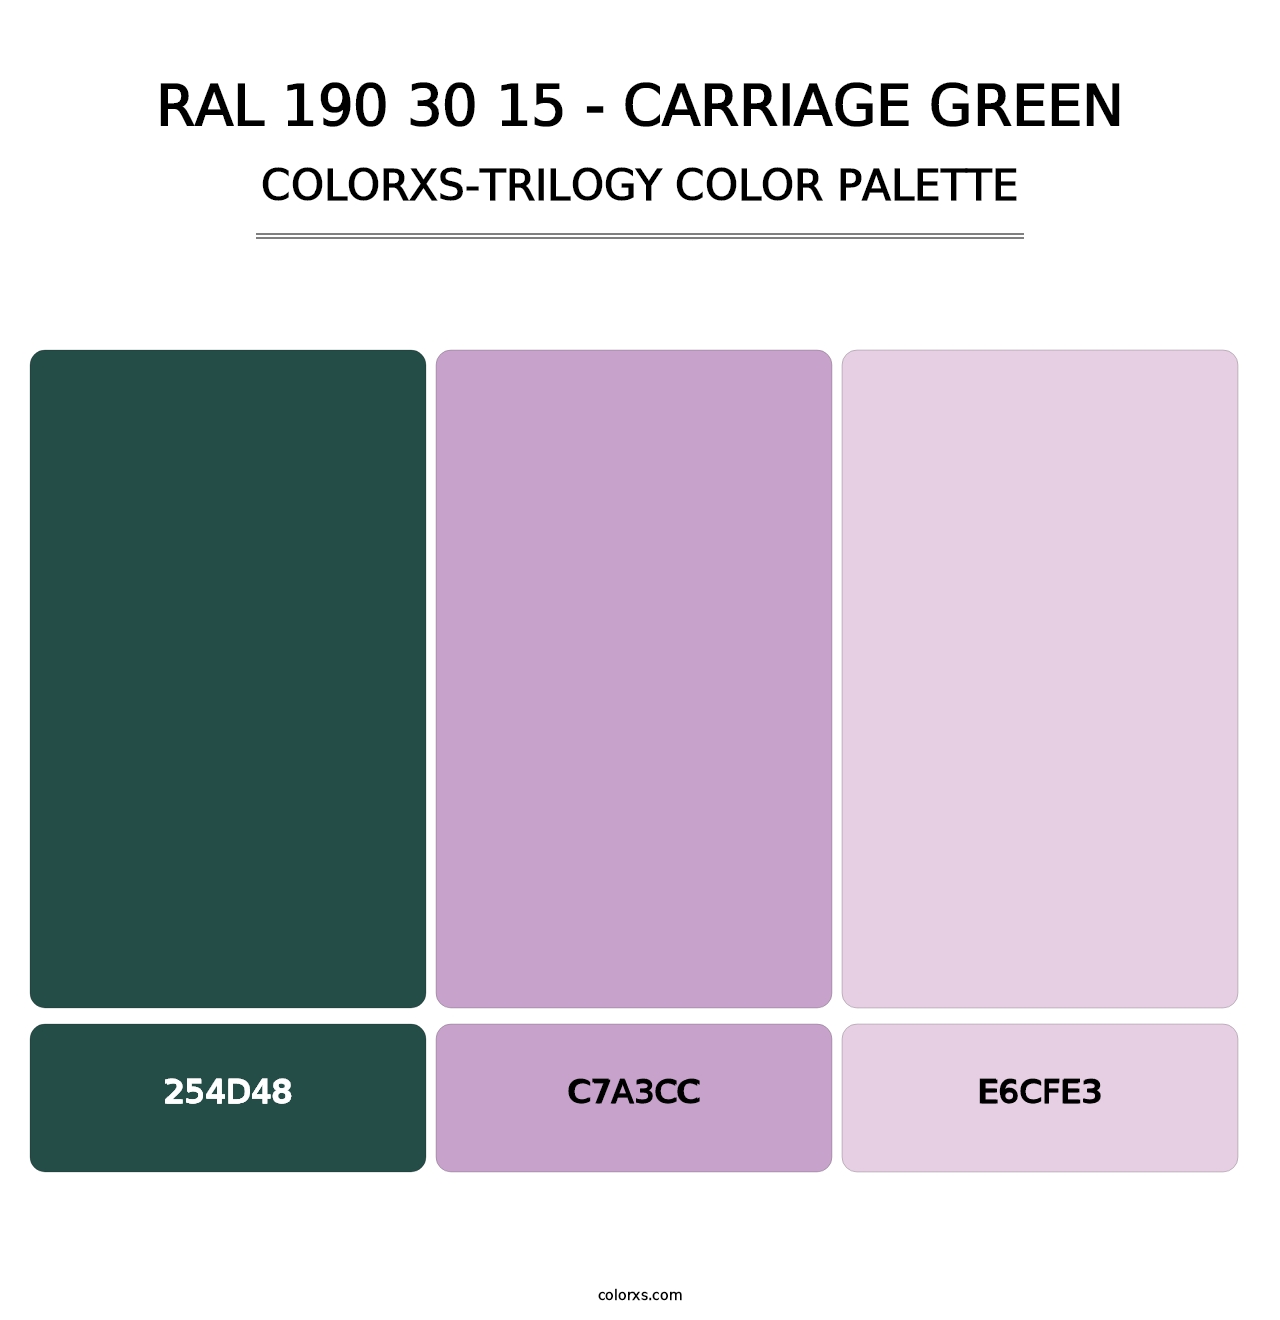 RAL 190 30 15 - Carriage Green - Colorxs Trilogy Palette